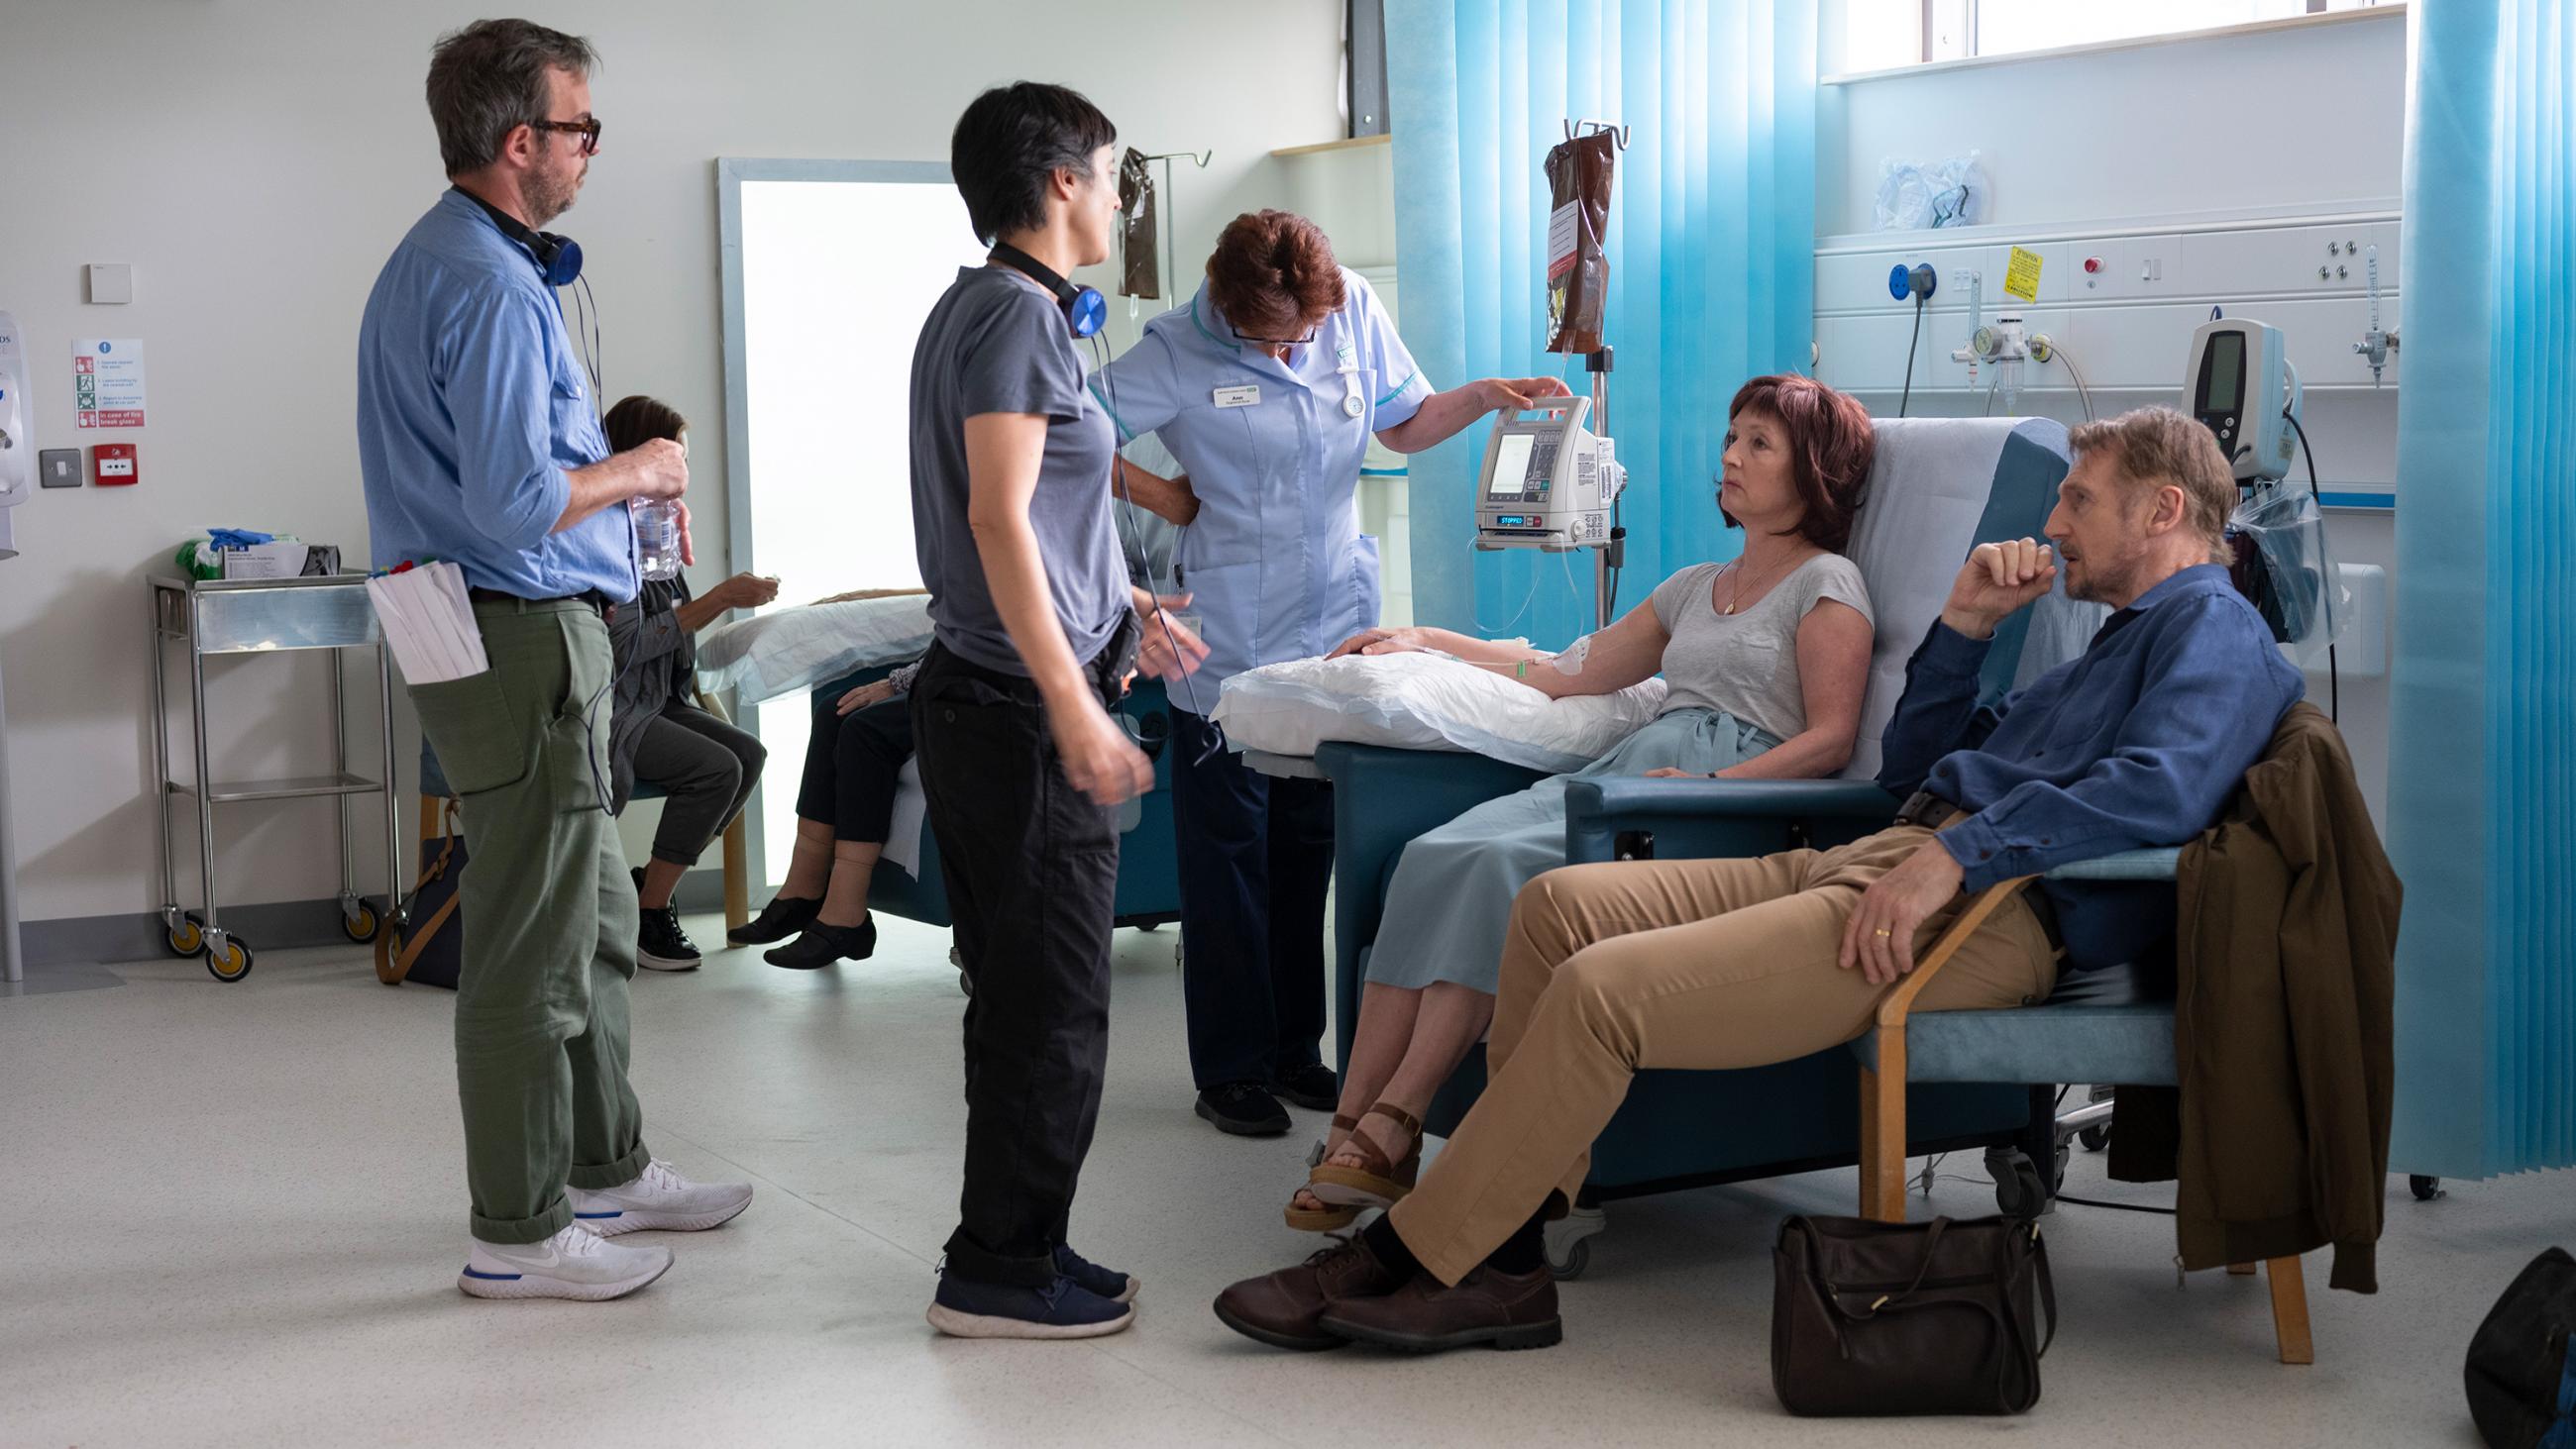 Picture is taken during production of the film in a scene where the couple is in a hospital ward. Various production folks can be seen in the shot. 